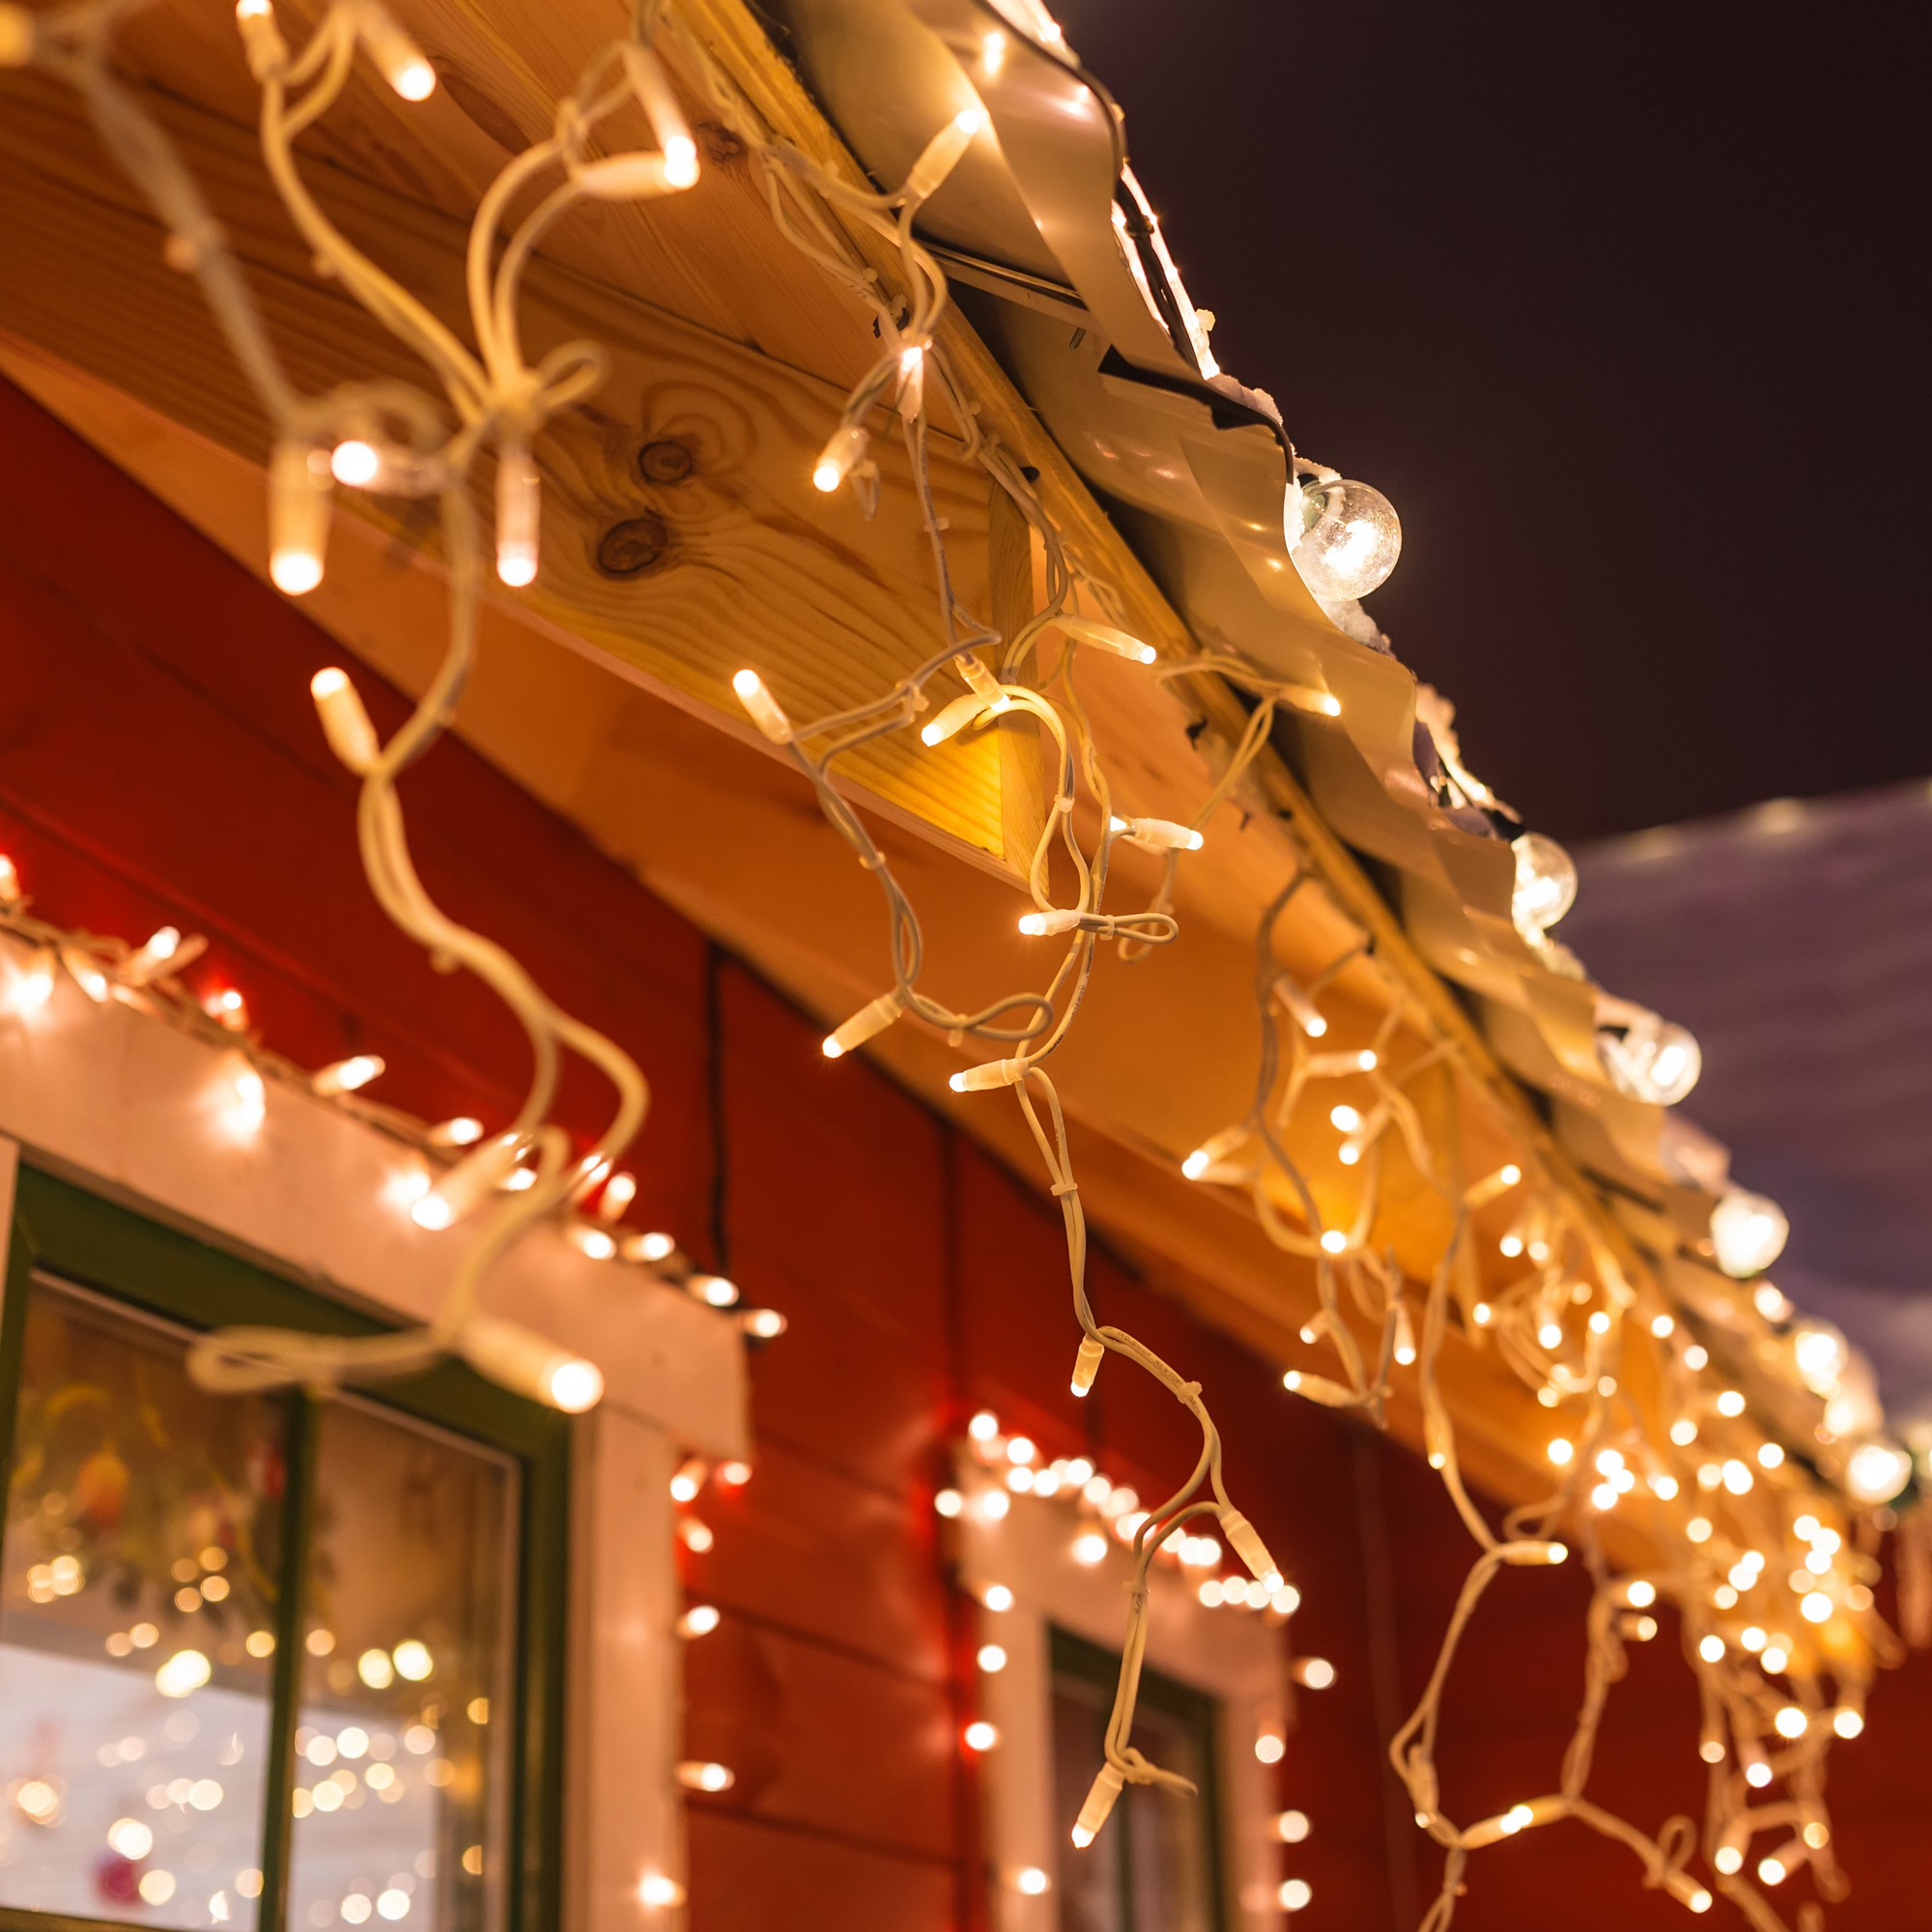 Light Up The Holidays! 5 Ways To Improve Visibility At Home